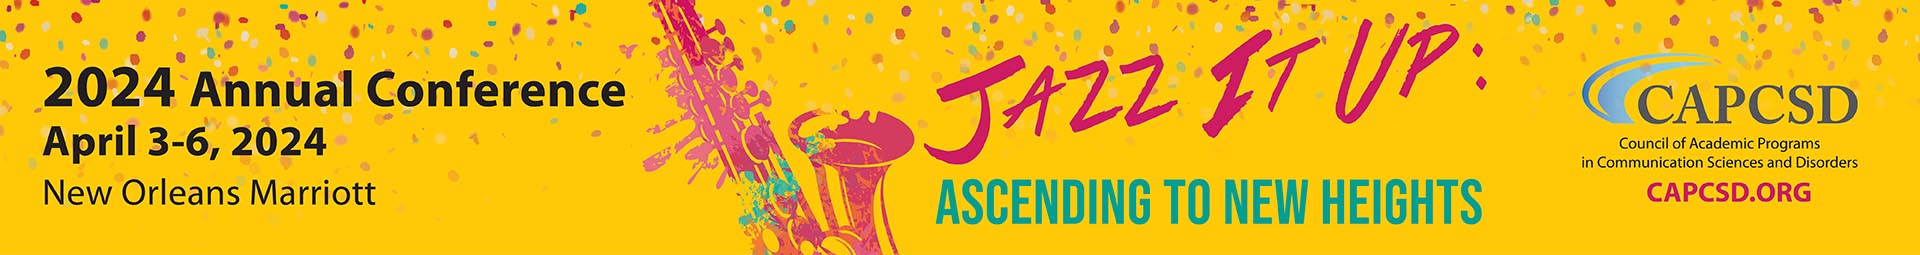 CAPCSD Annual Conference banner, theme is Jazz It Up: Ascending to New Heights, held in New Orleans April 3-6, 2024